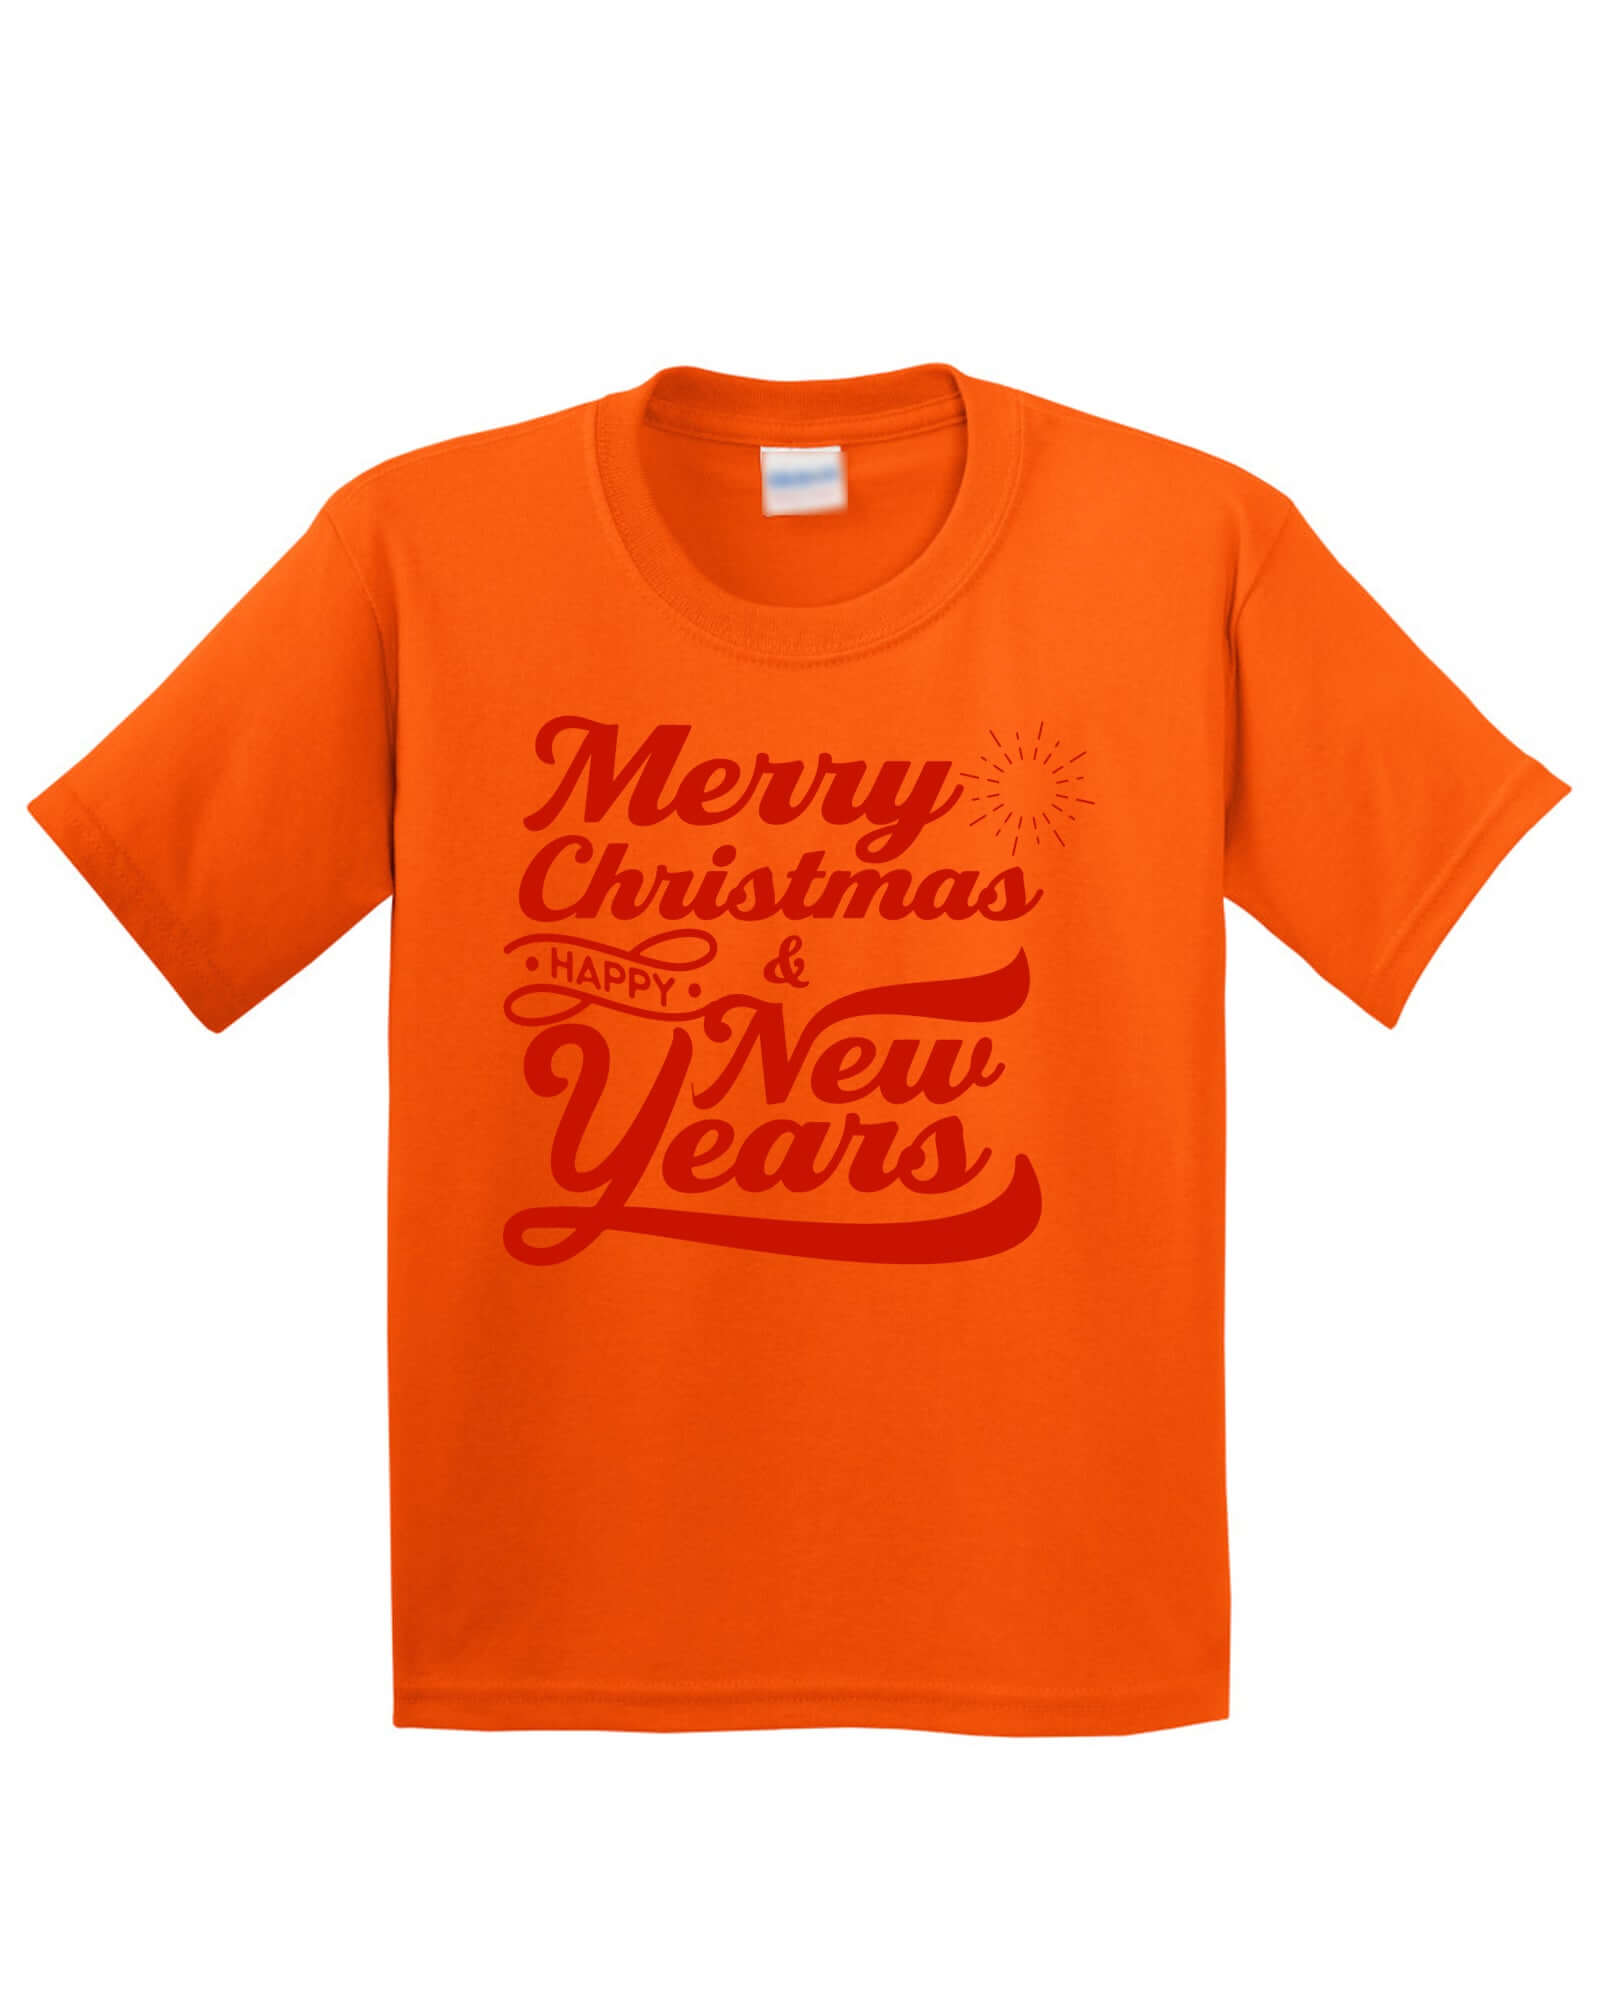 Merry Christmas Happy New Year Kids T-Shirt - ApparelinClick